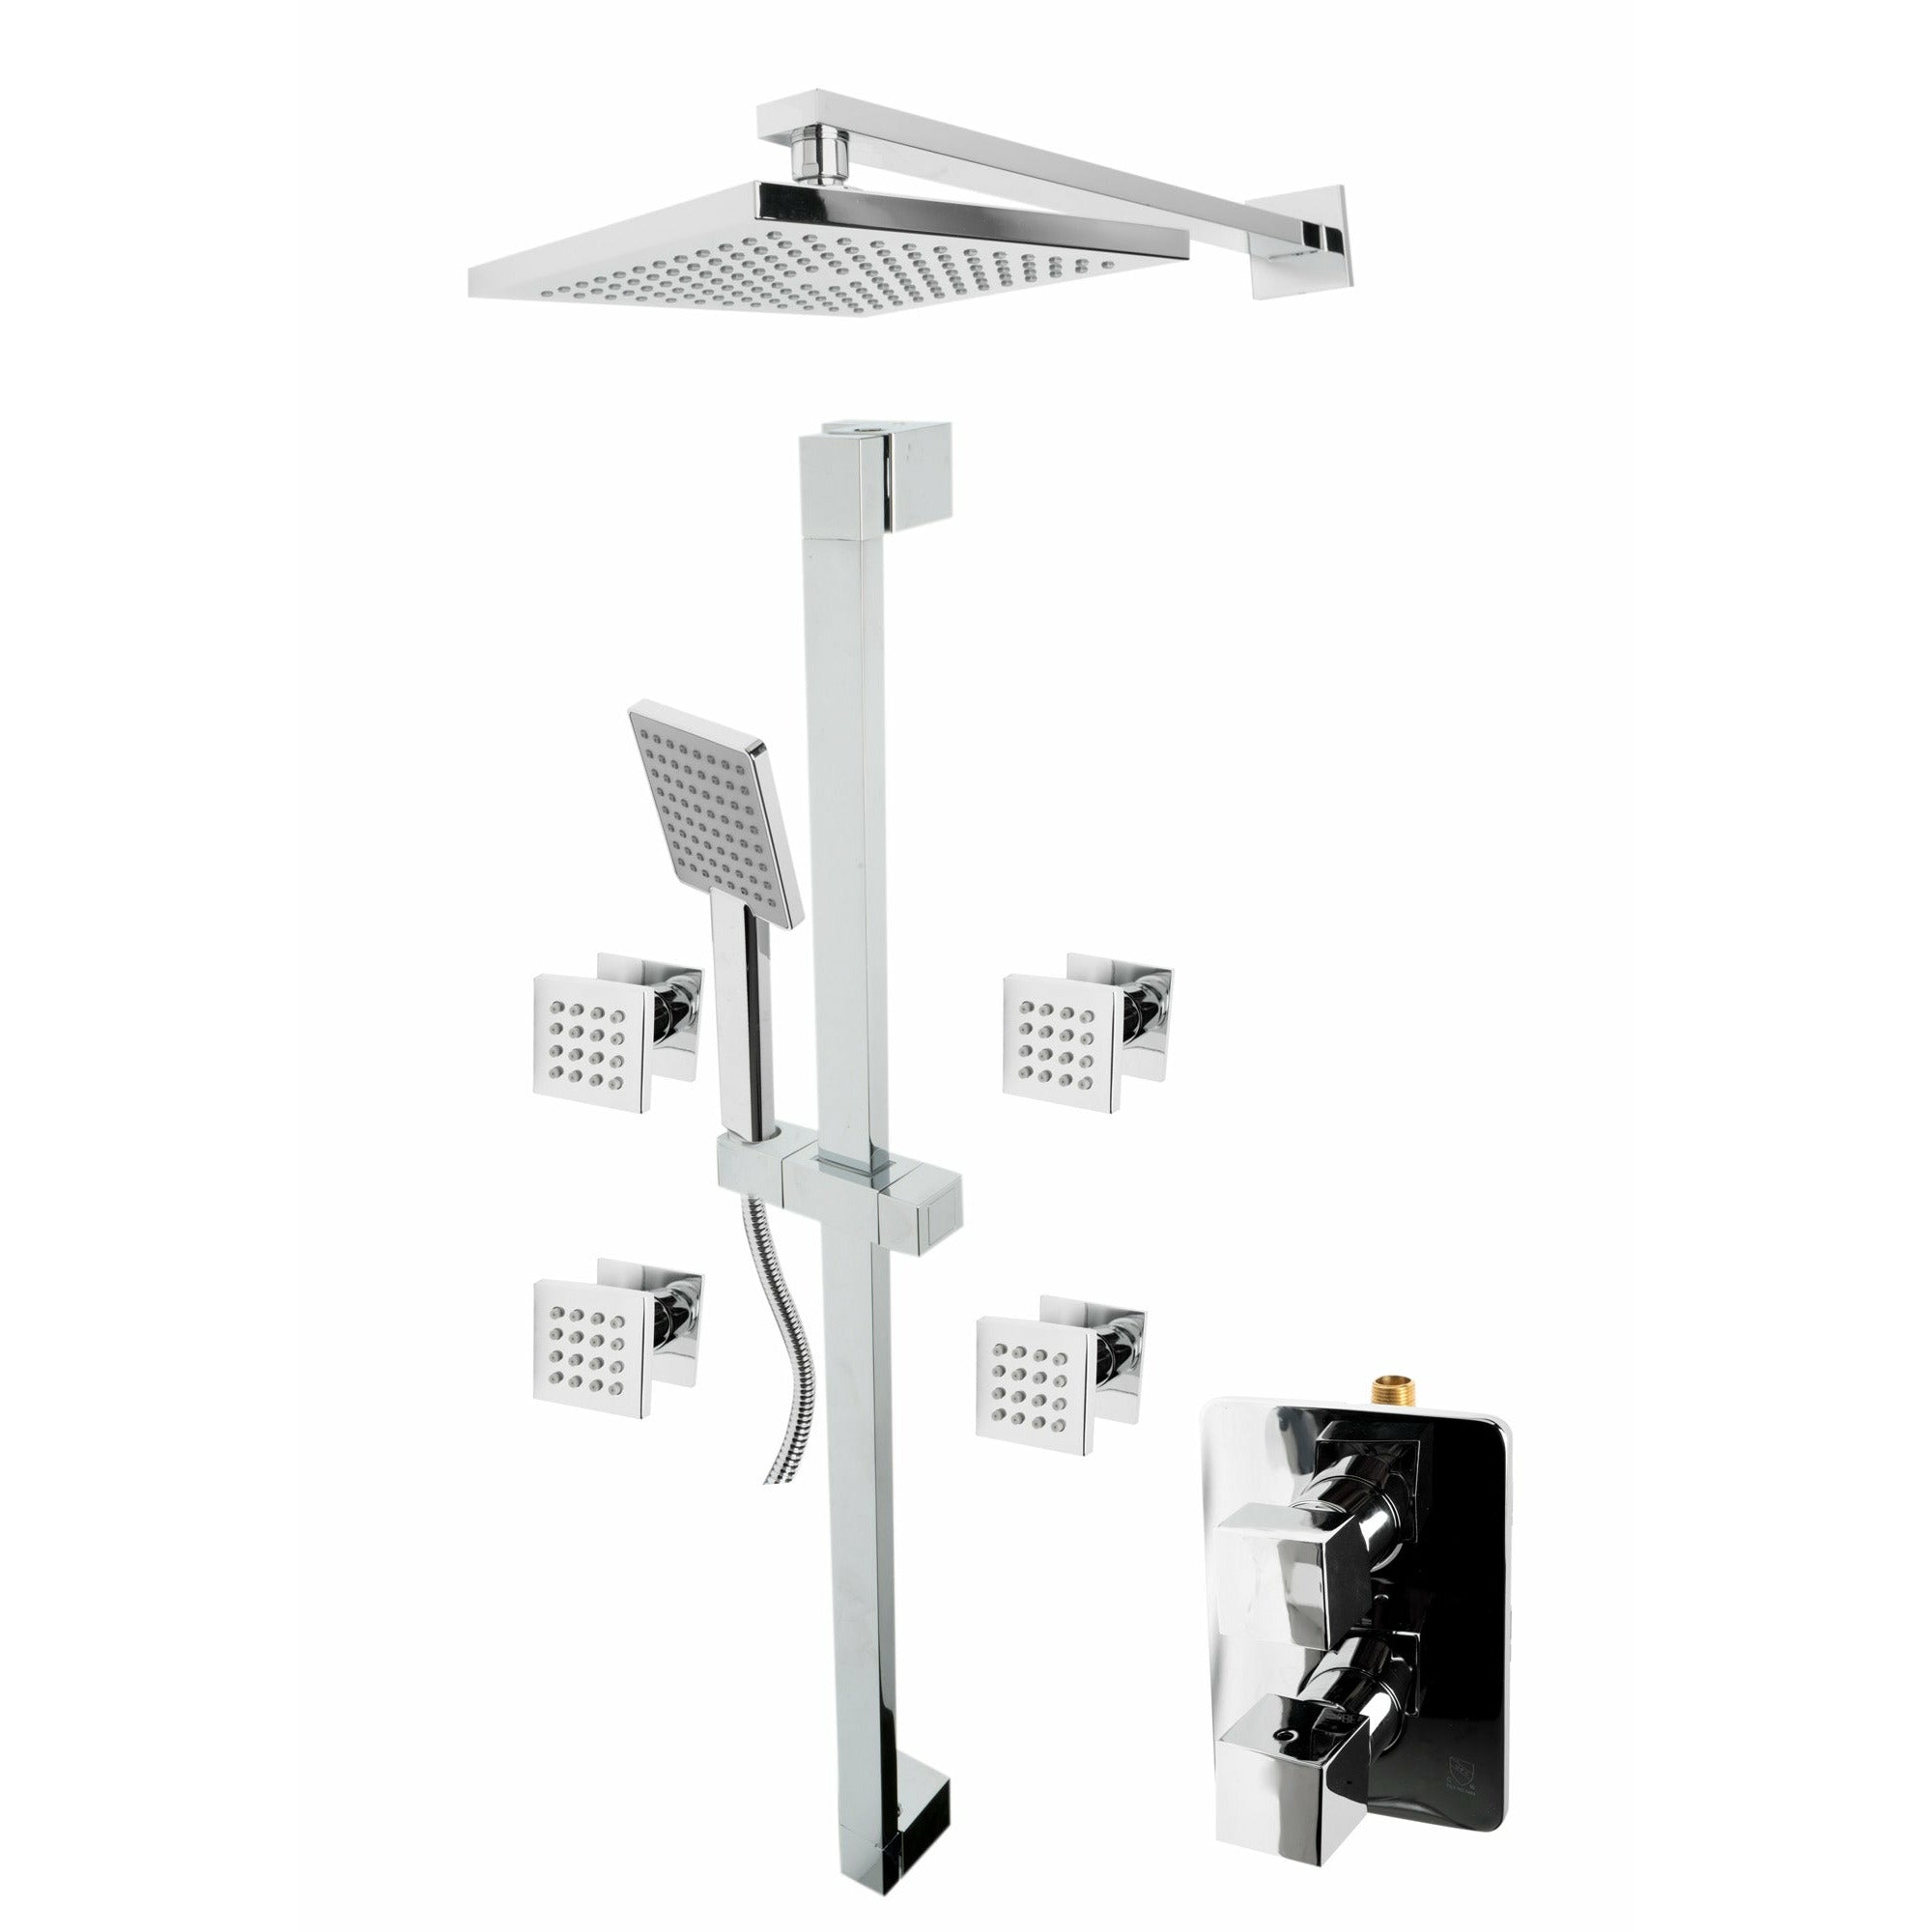 ALFI AB2287-BN Brushed Nickel 3 Way Thermostatic Shower Set with Body Sprays - water diverter, temperature control, rain showerhead, handheld showerhead, and 4 adjustable body jets with modern squared edges in a white background